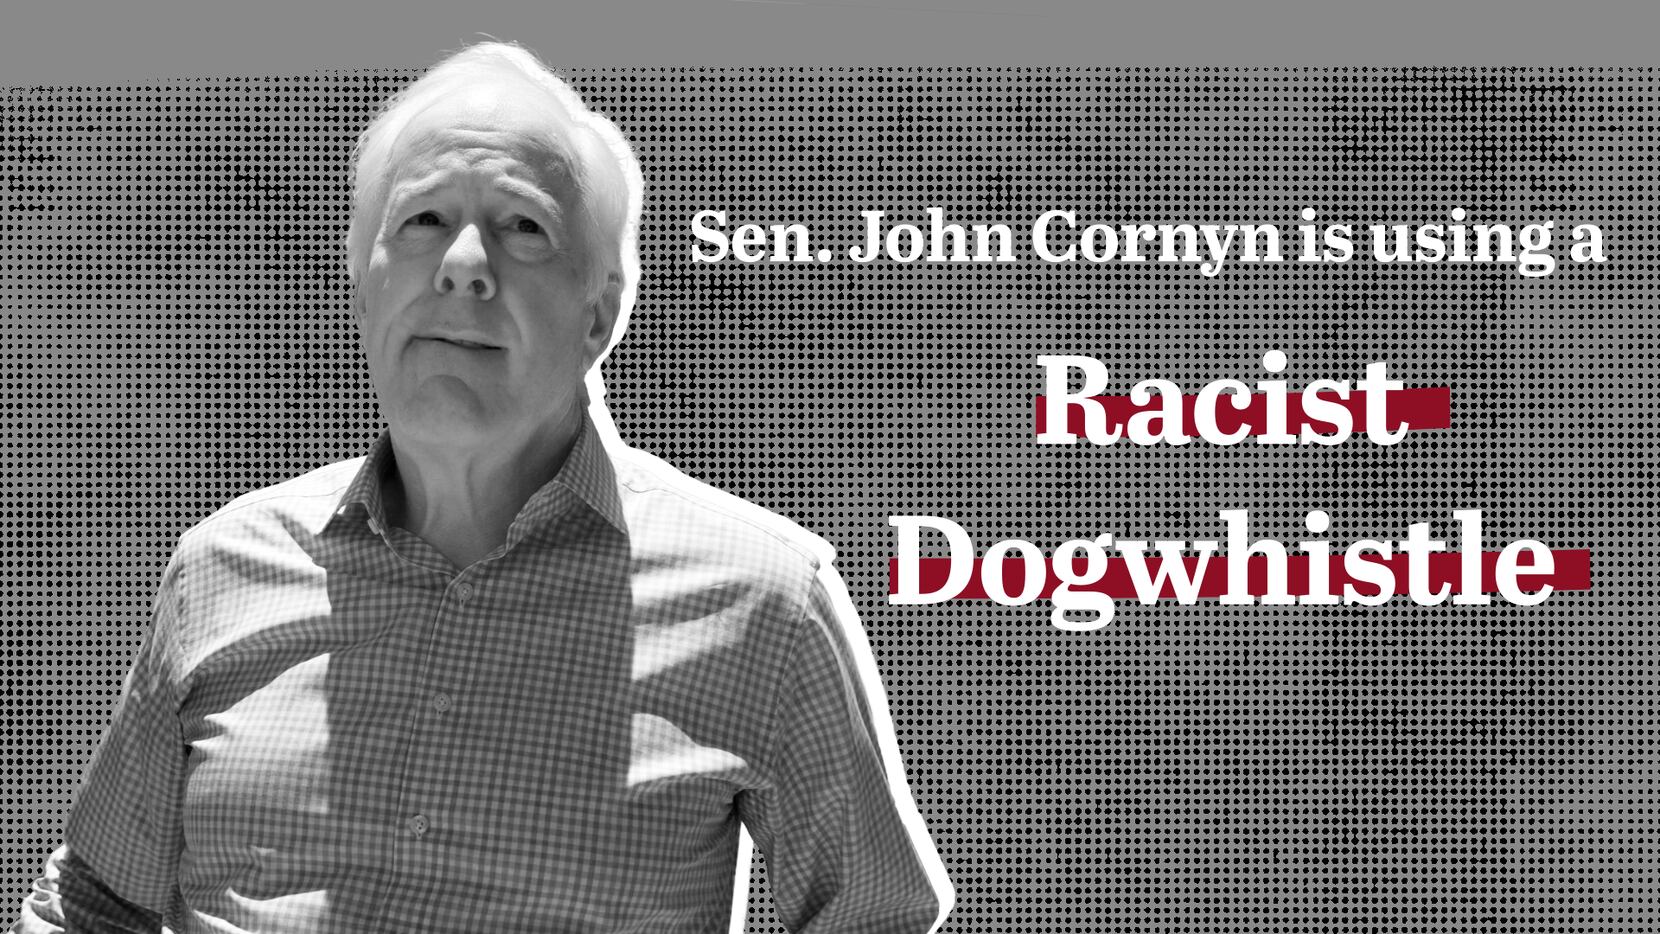 Screen shot from May 18, 2020, web ad from state Sen. Royce West's campaign, accusing Sen. John Cornyn of using a "racist dogwhistle" against him.